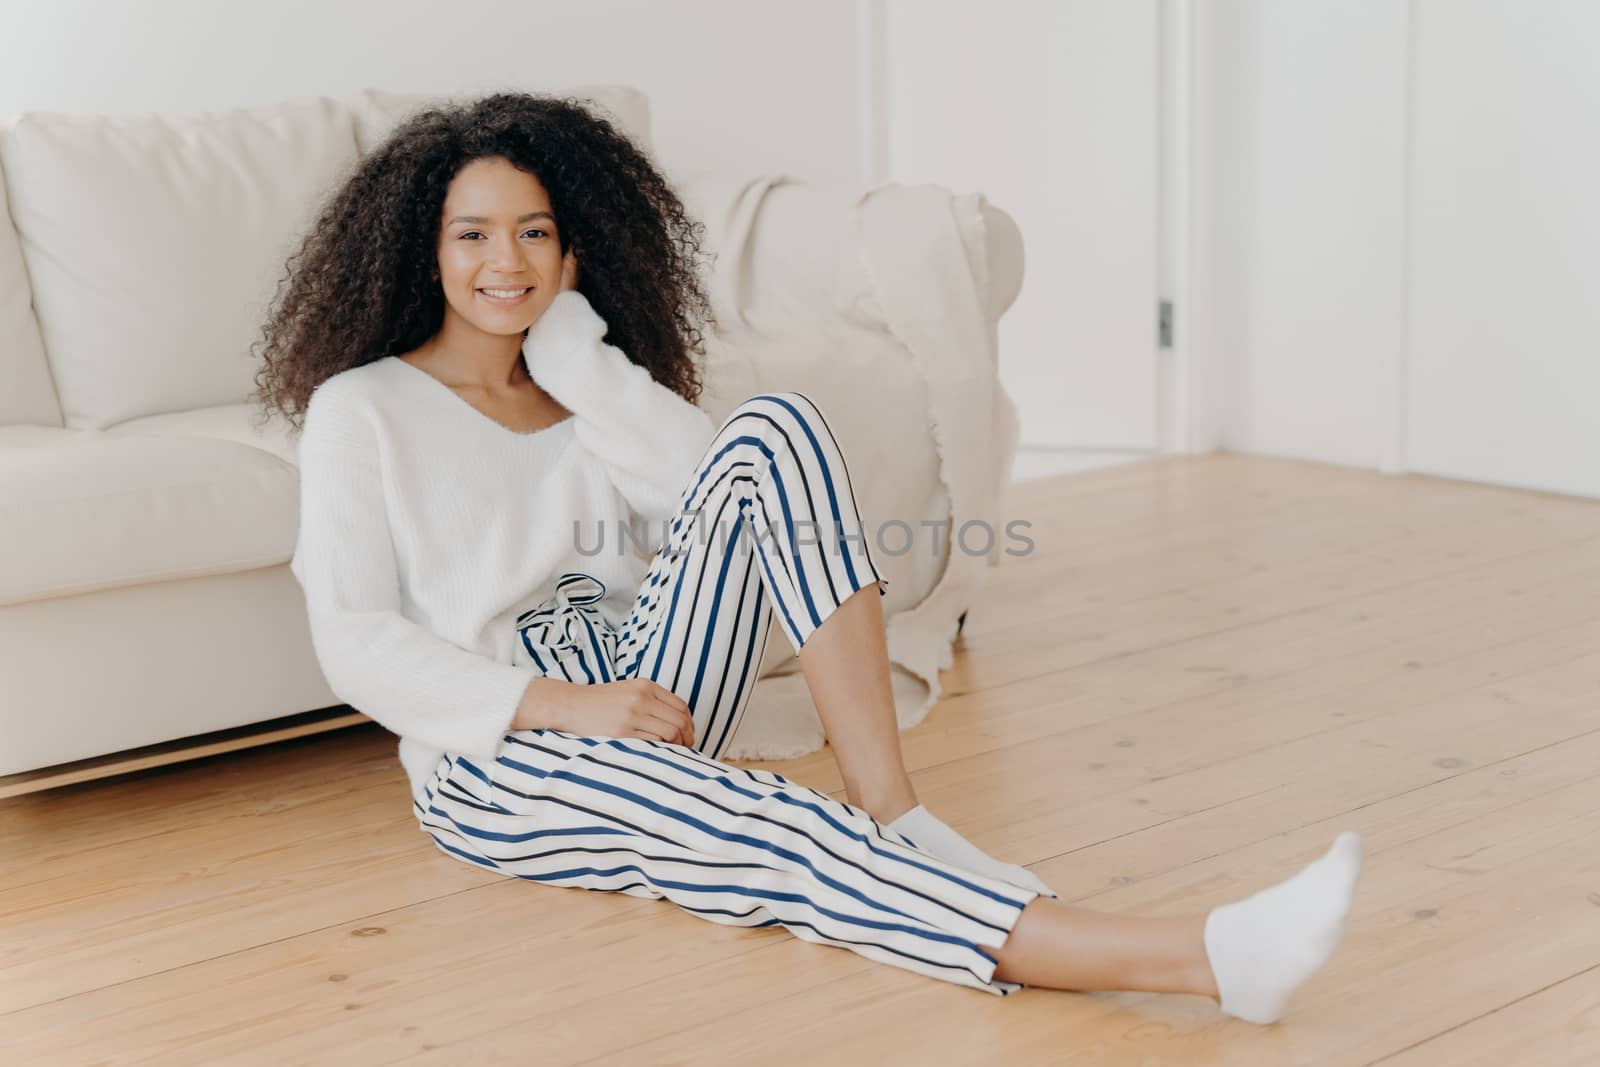 Ethnic girl feels relaxed and satisfied, sits on floor near comfortable sofa in empty room, wears white sweater, striped pants and socks, enjoys domestic atmosphere, enjoys coziness and comfort by vkstock